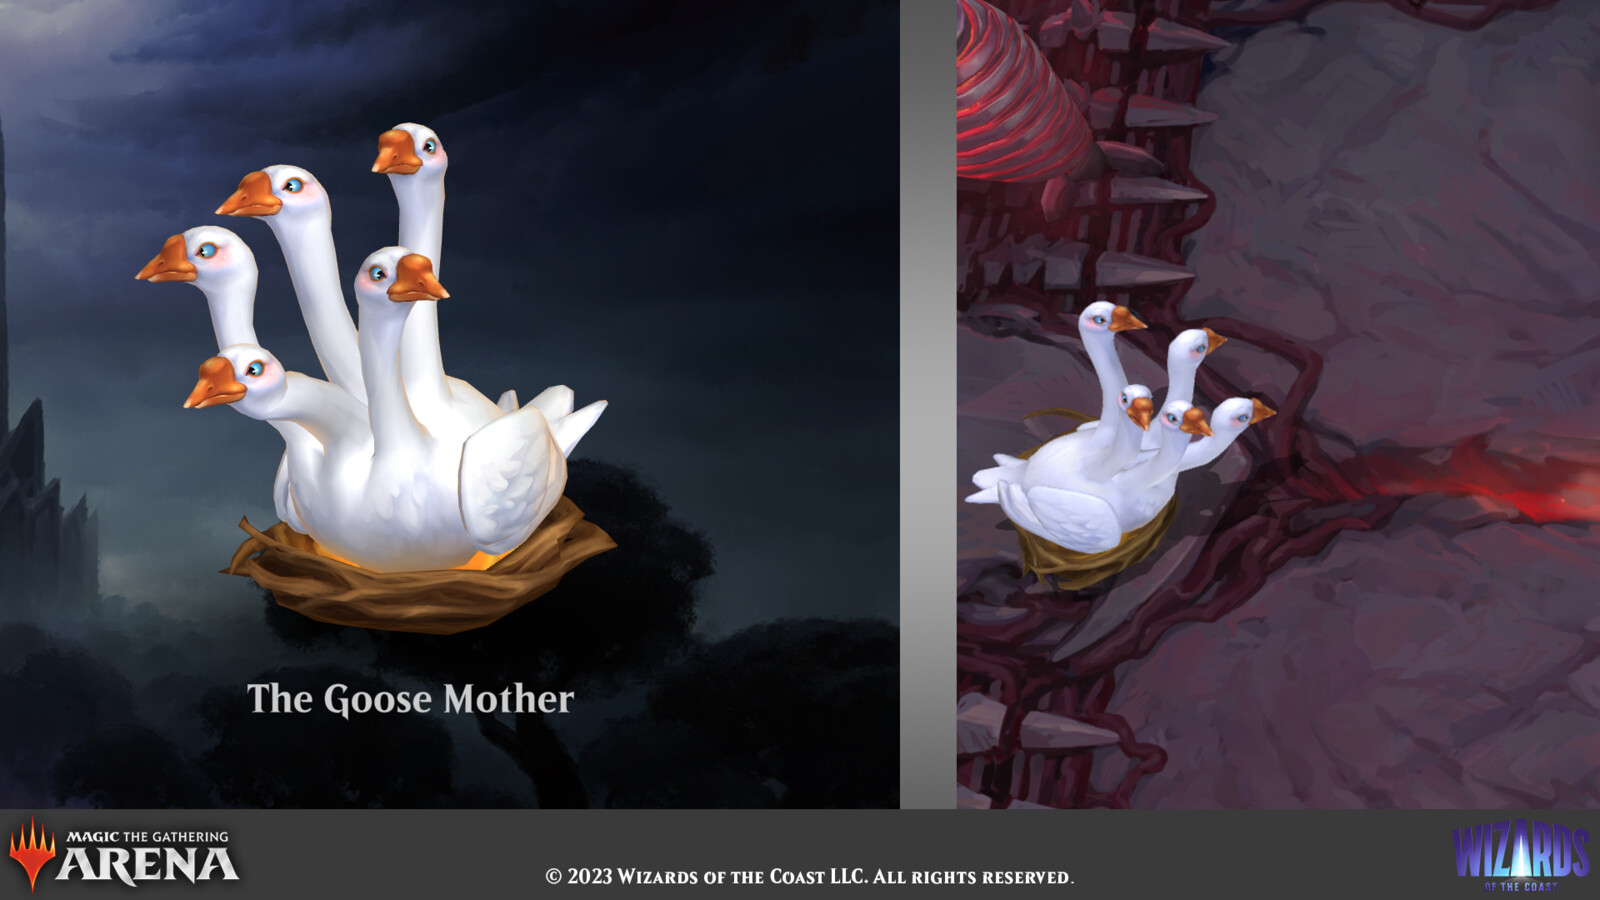 Select companion and game views for The Goose Mother